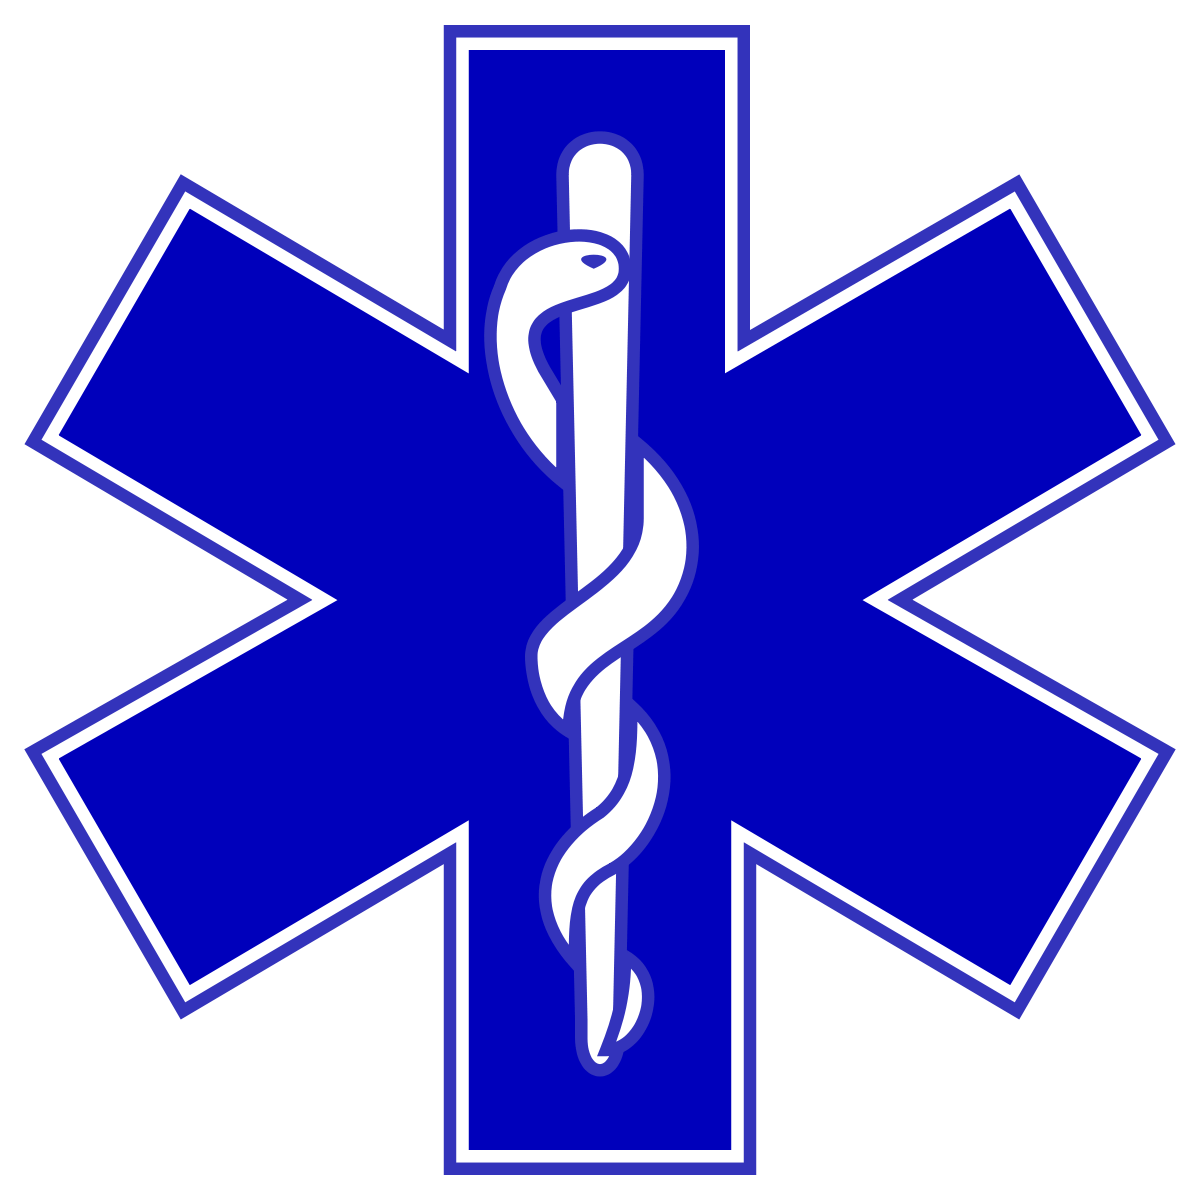 Search and Rescue Medical Cross Logo - Emergency medical technician